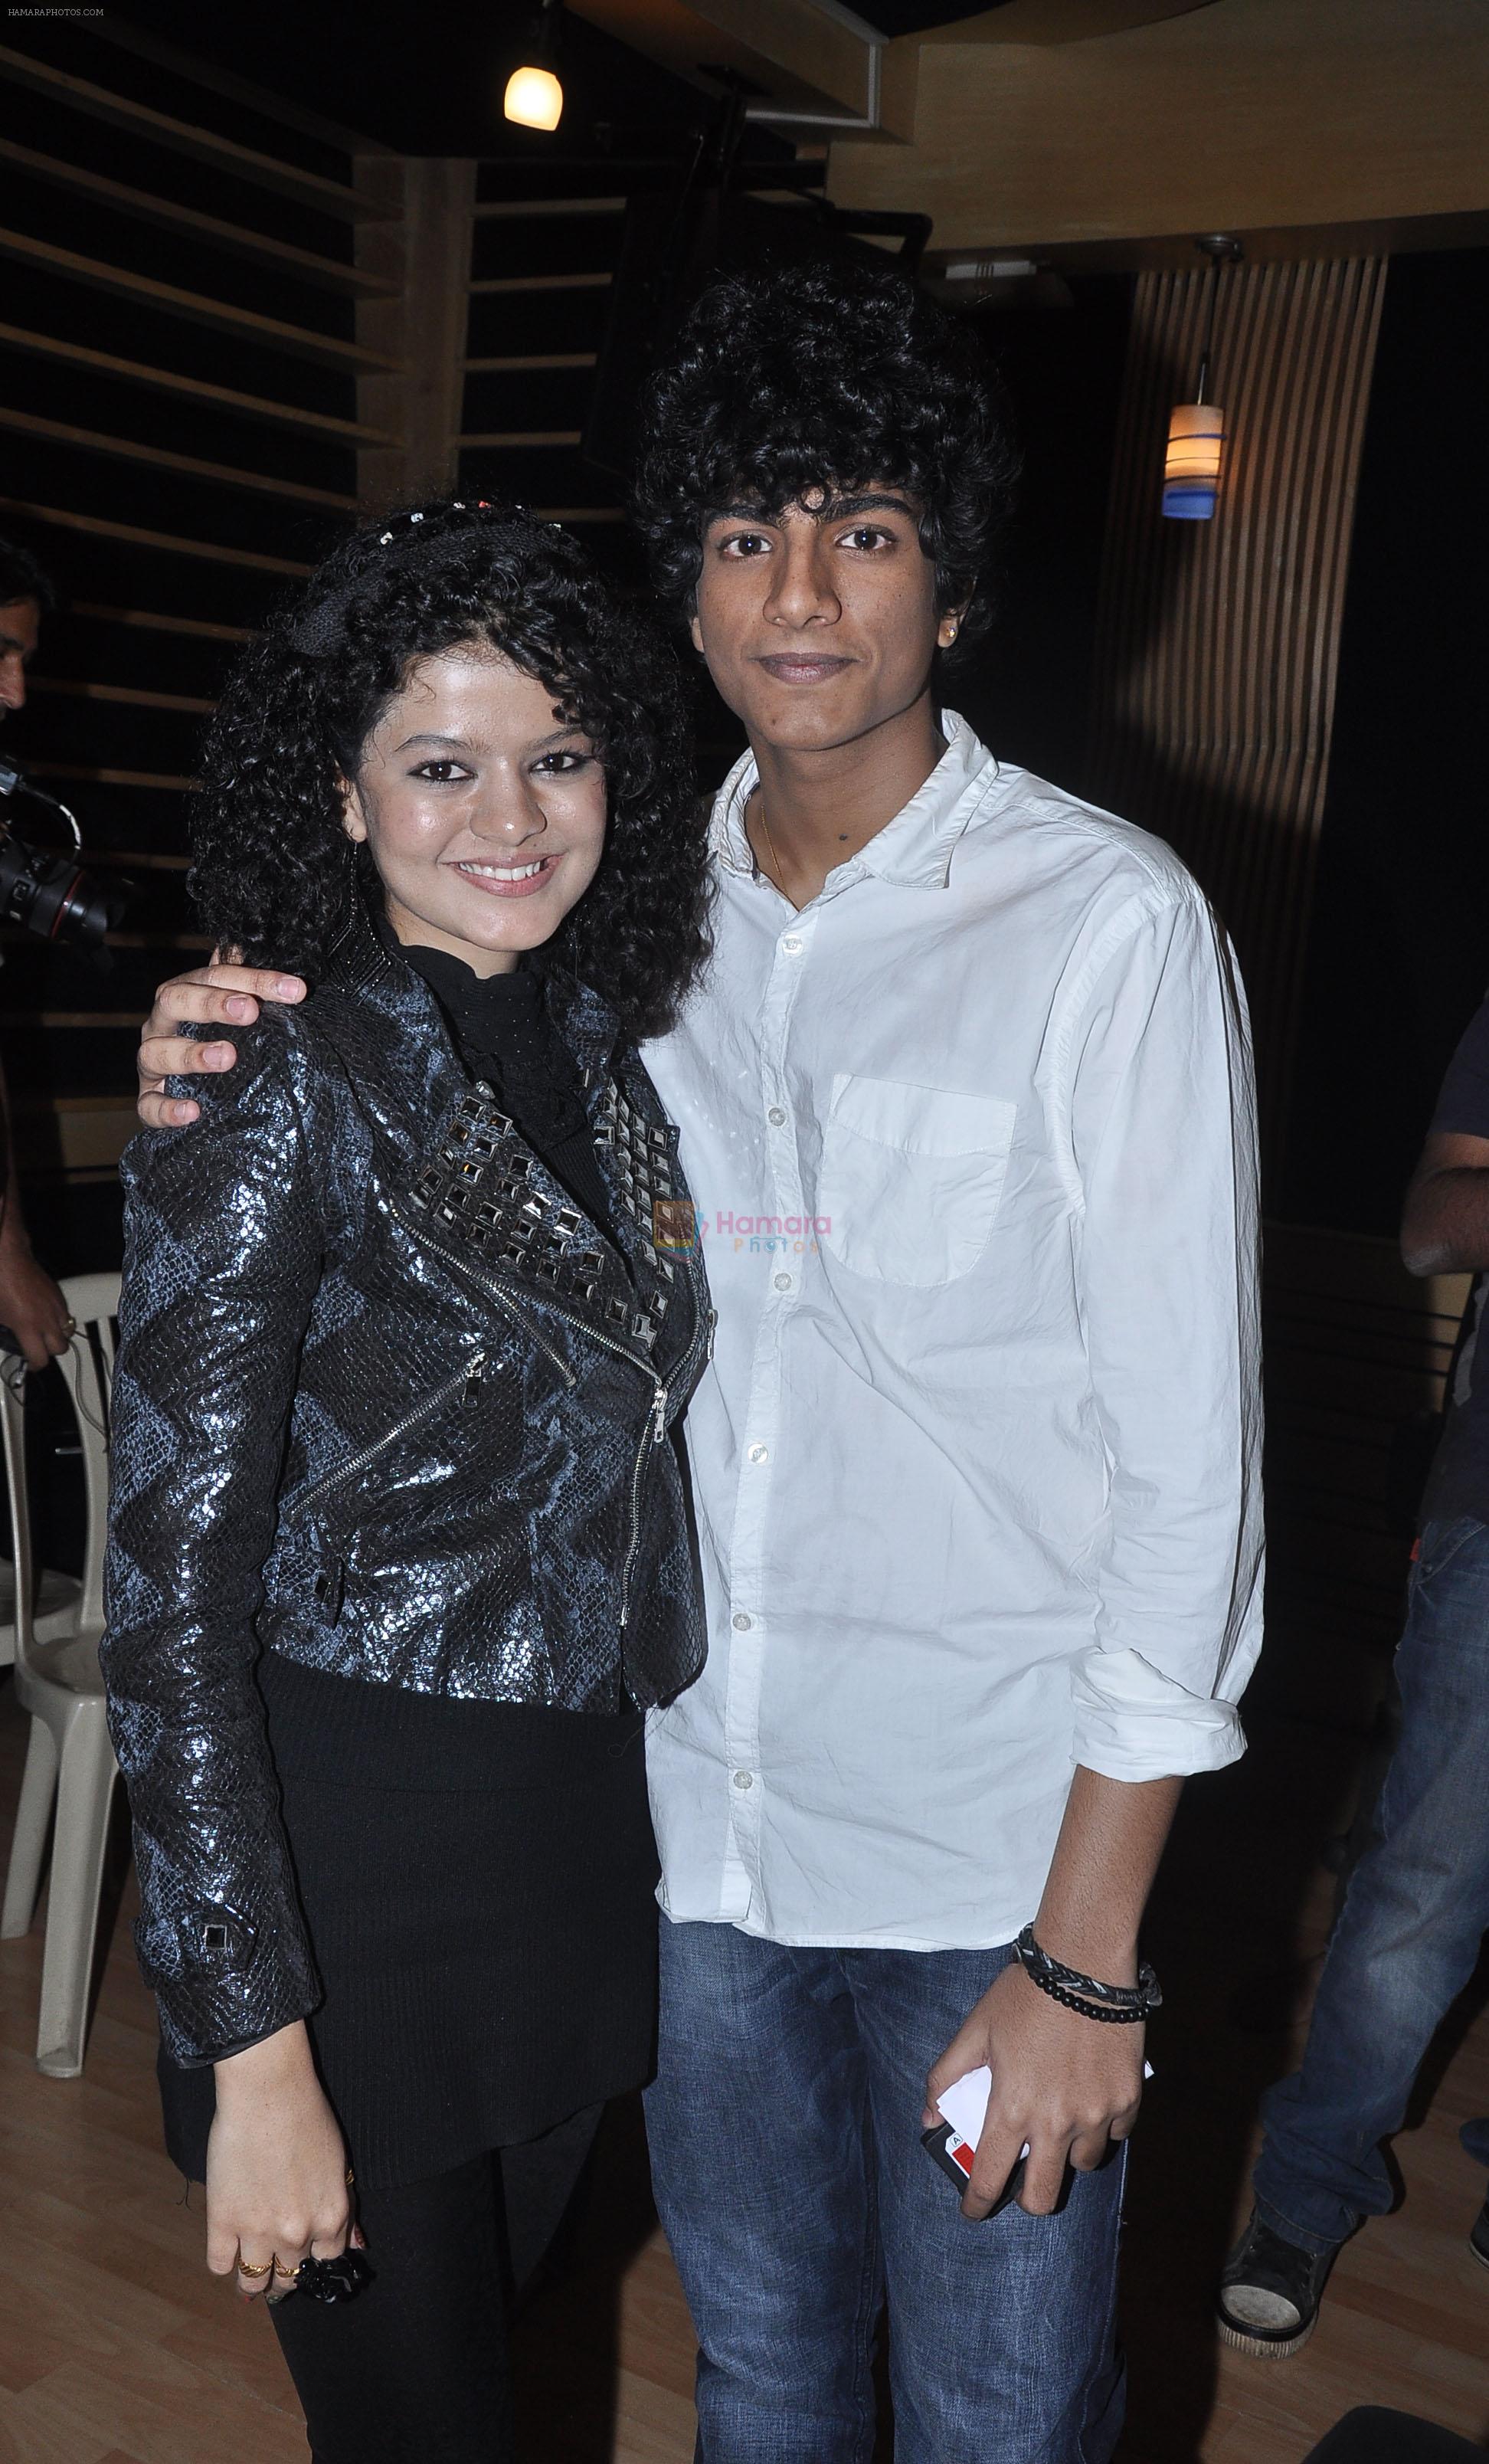 Brother Palash Muchhal wishing Palak Muchhal for winning the Zee Cine Awards after the song recording for Shilpa Shetty's productions film _Dishkiyaaoon_